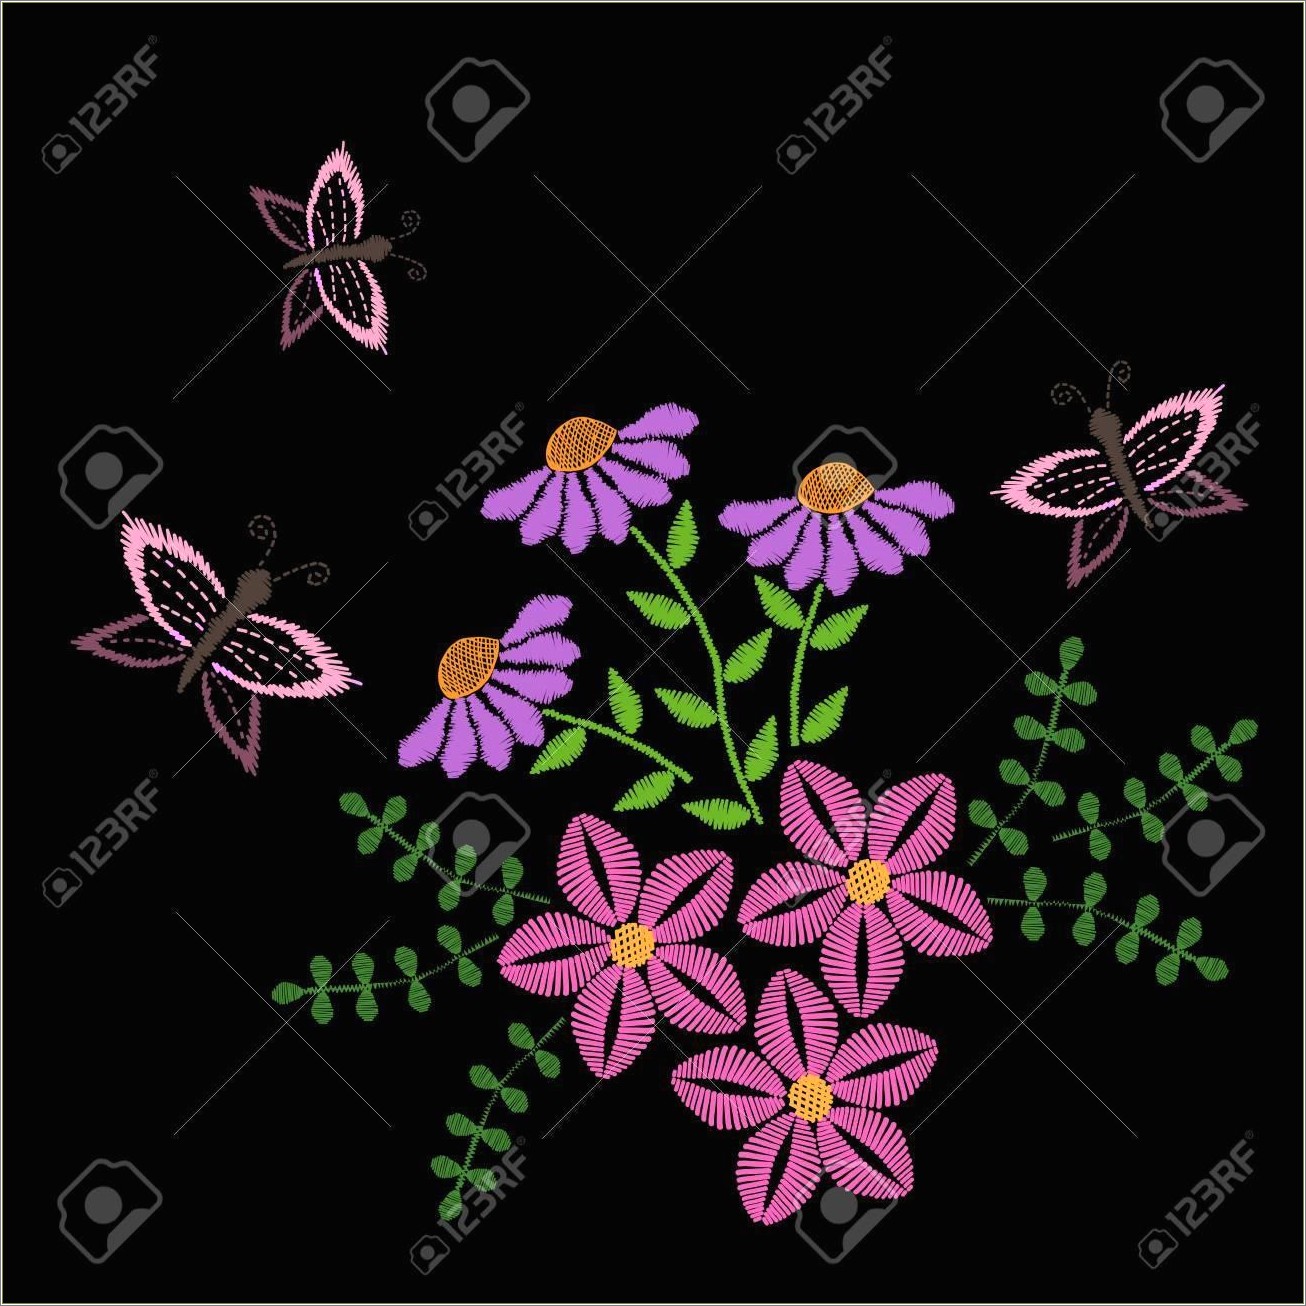 Free Embroidery Templates Floral With Butterflies